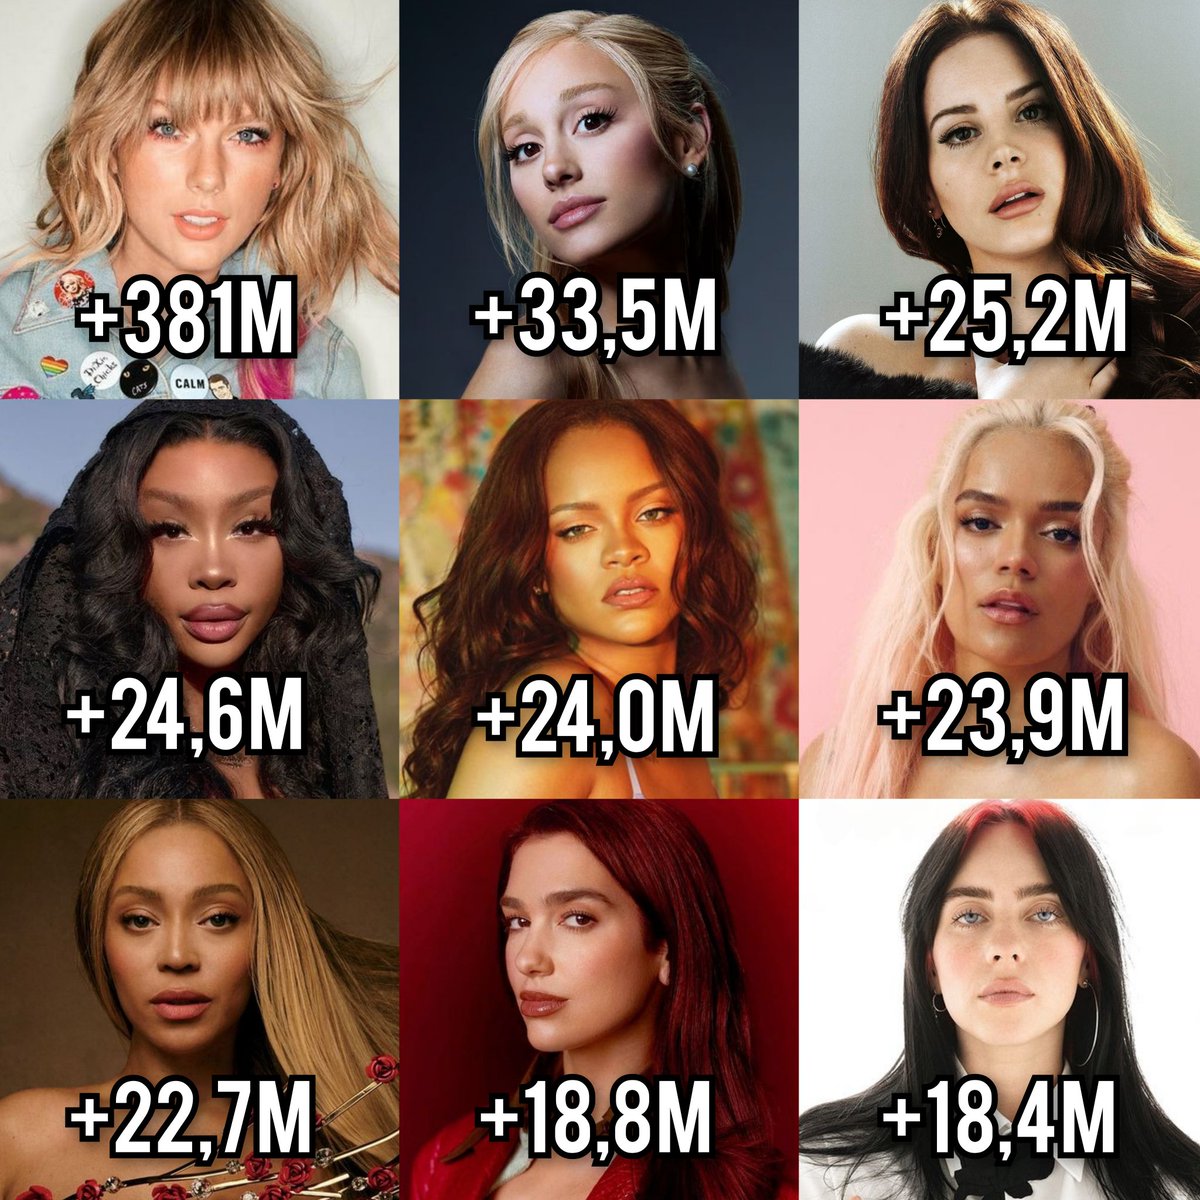 Most streamed Female artists yesterday on Spotify (19/04):